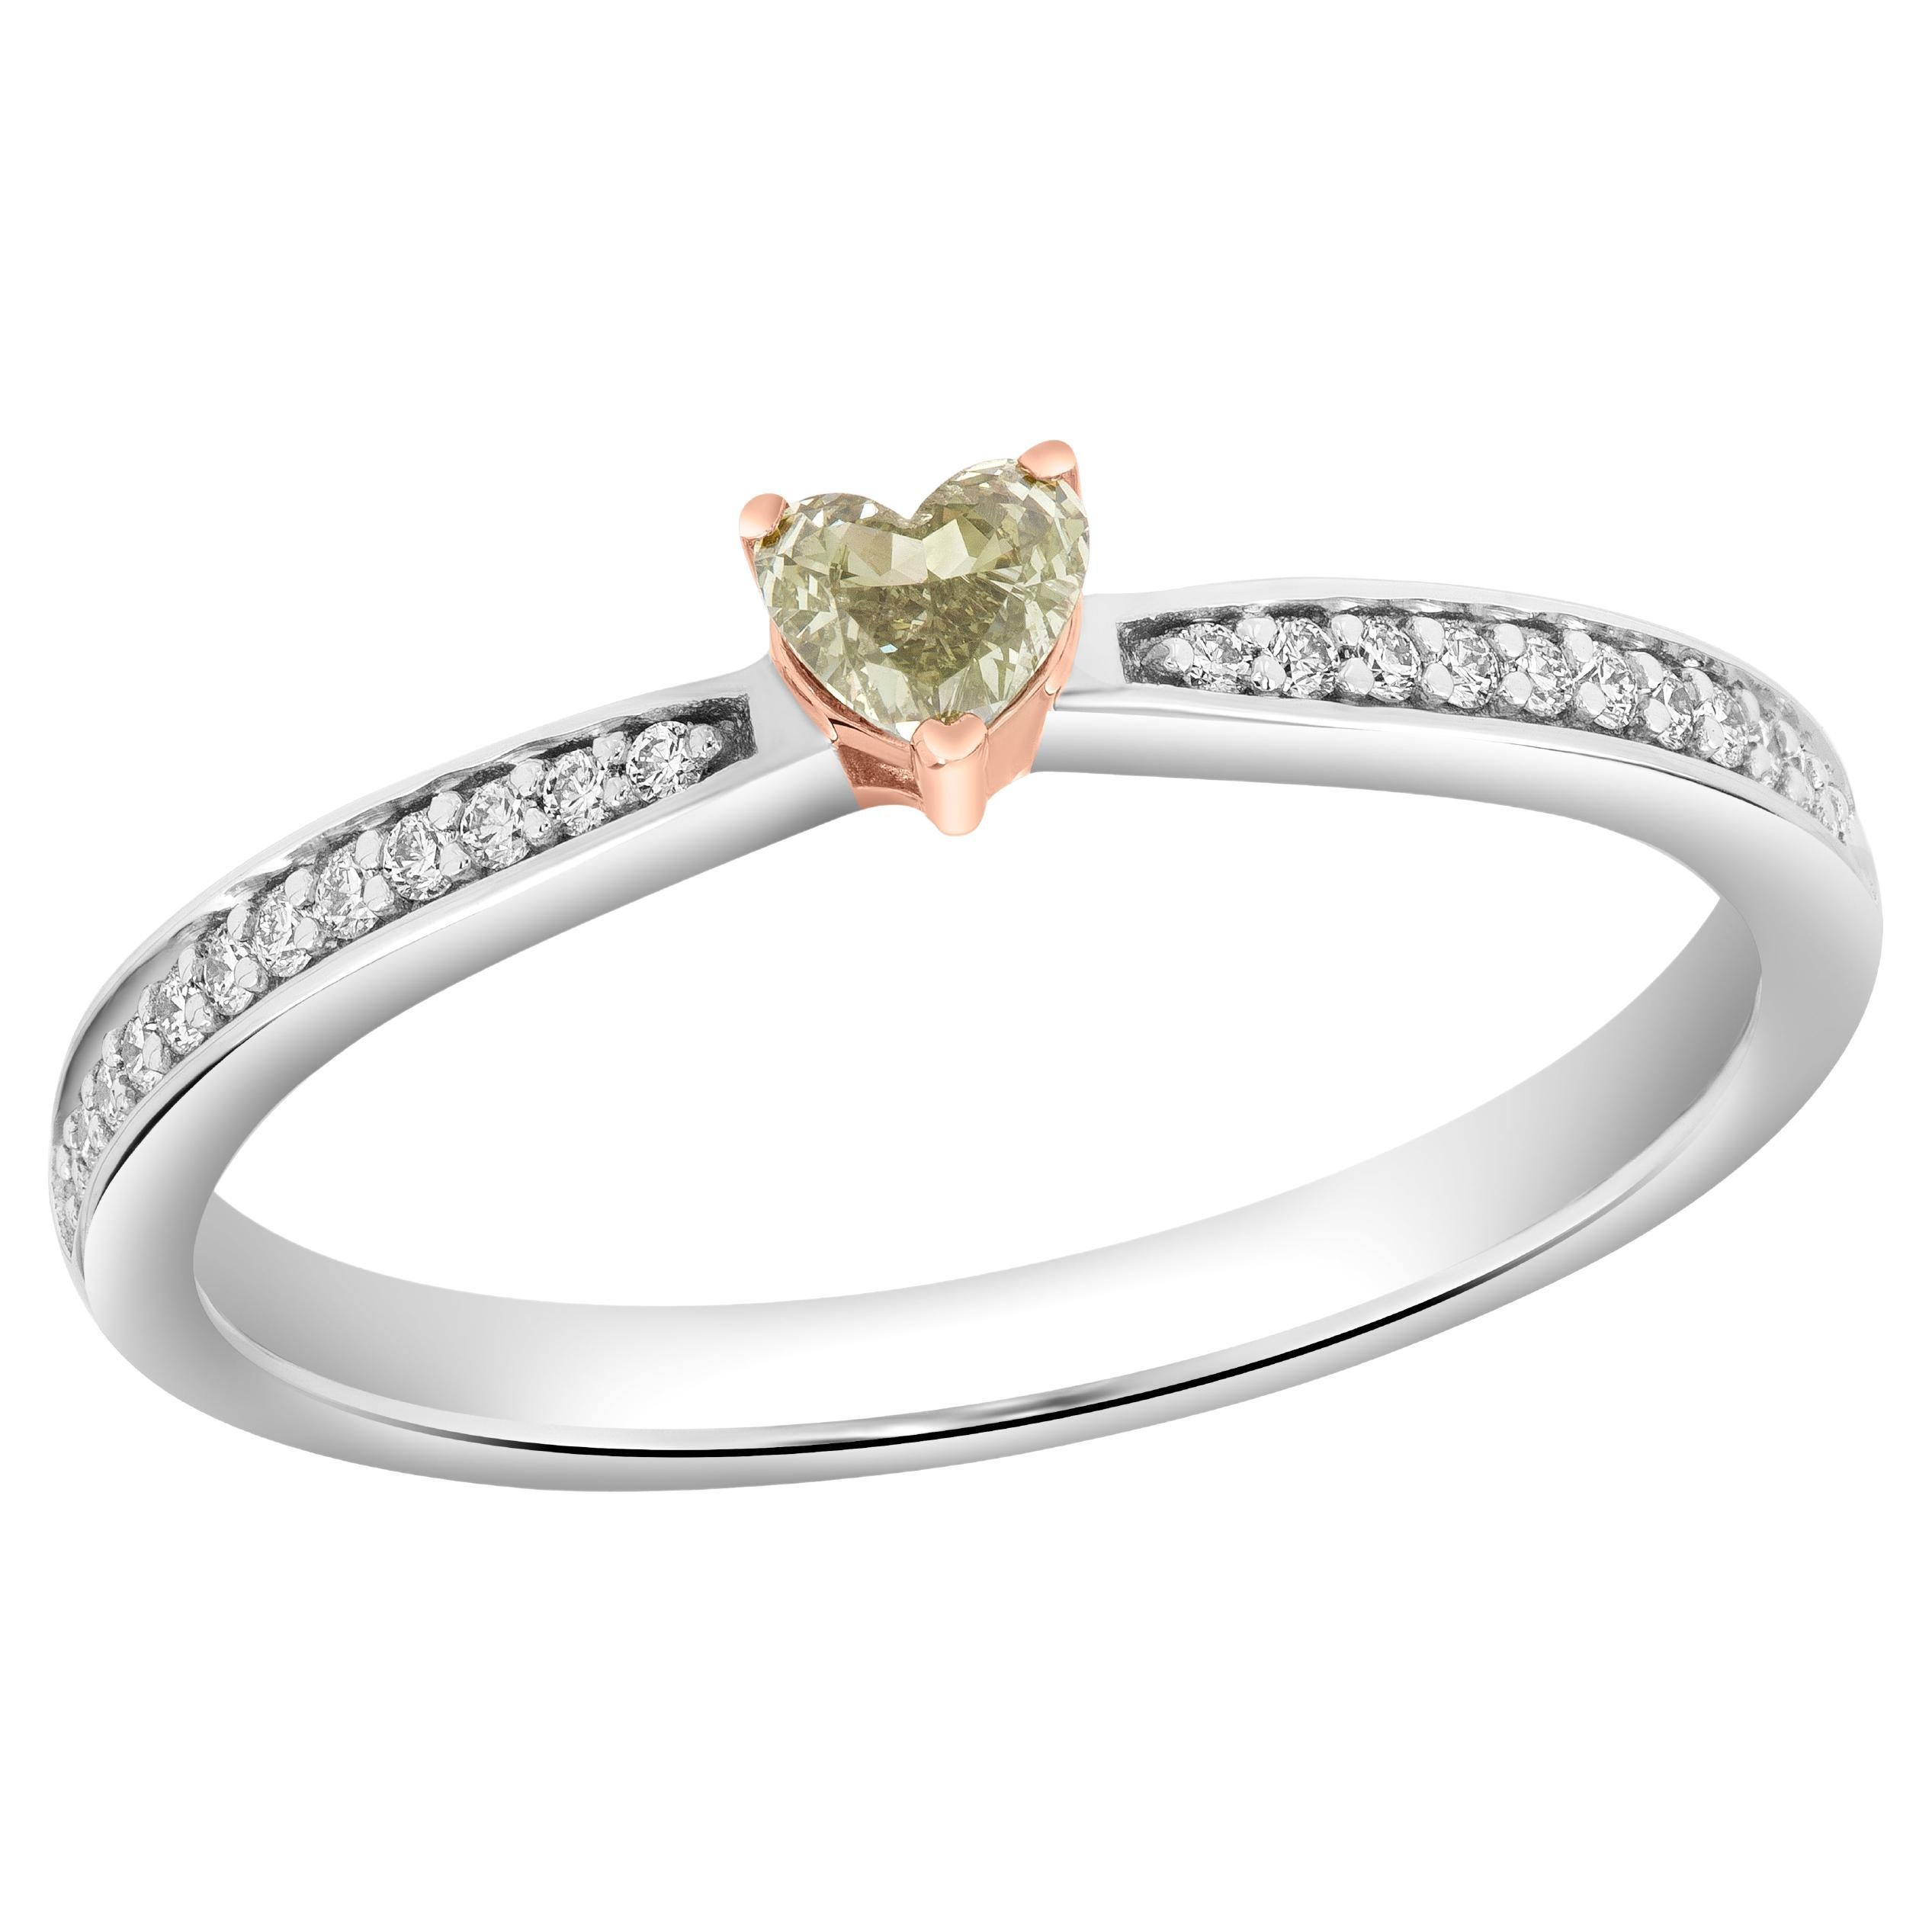 Fancy Yellowish Green Heart Shaped Stackable Ring Set in 14k Rose & White Gold